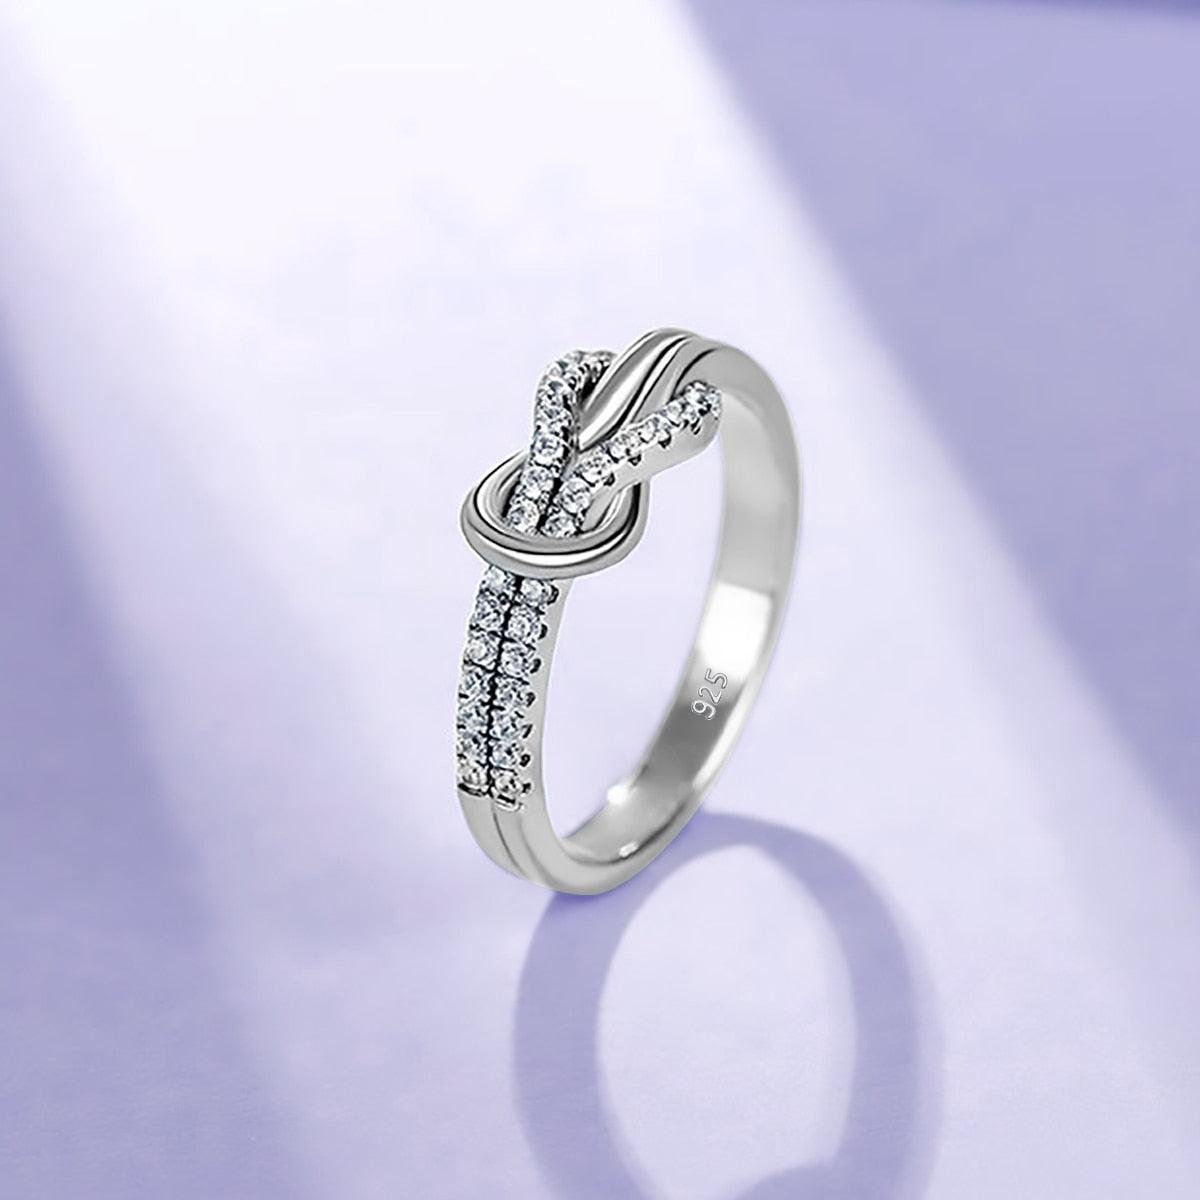 A silver half pave infinity knot ring.